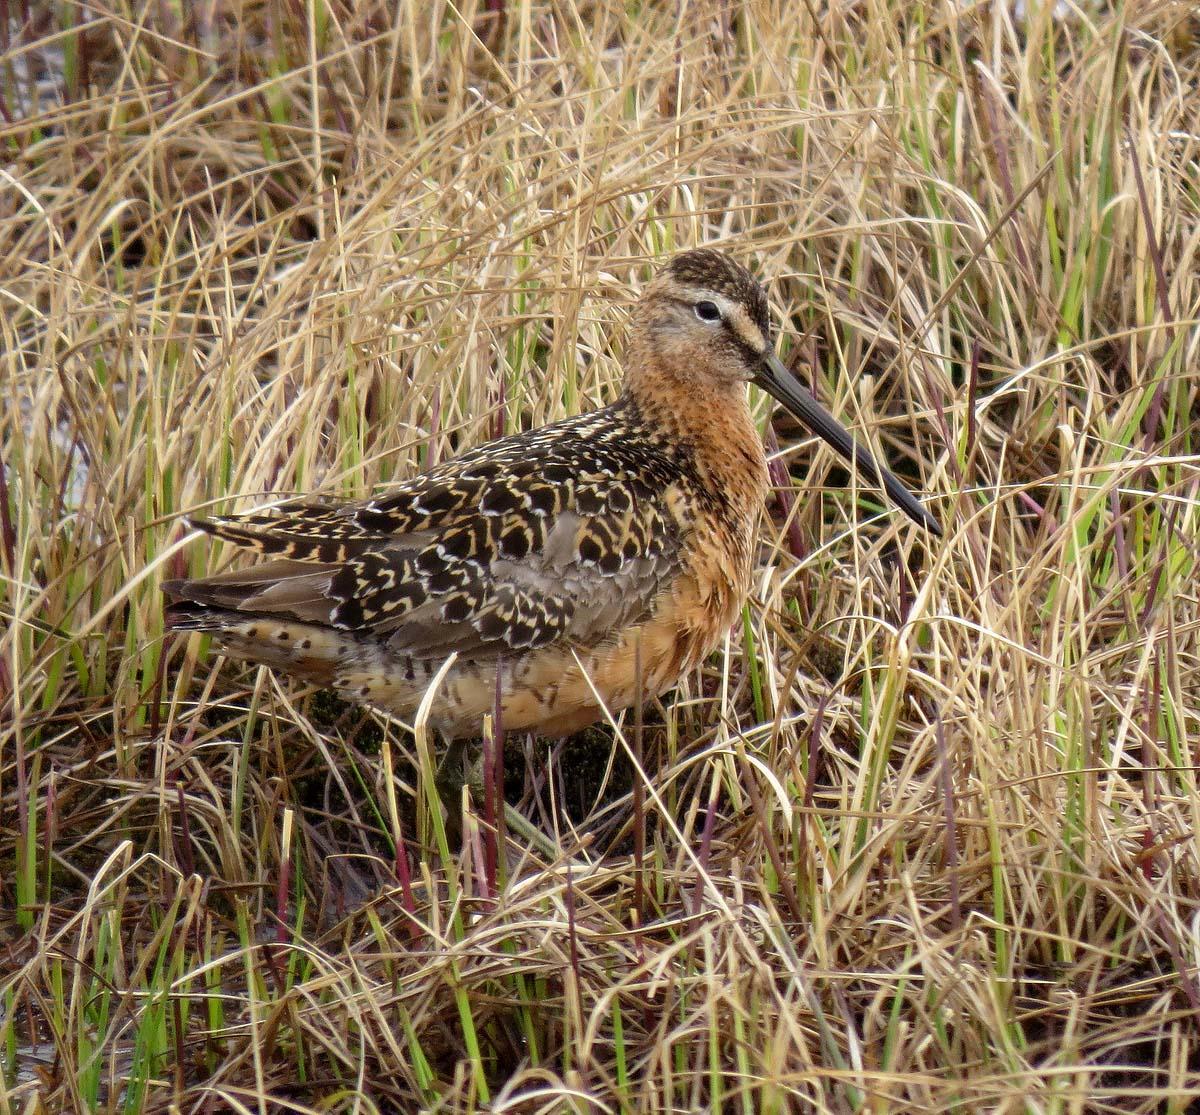 Long-billed Dowitcher Photo by Peter Boesman